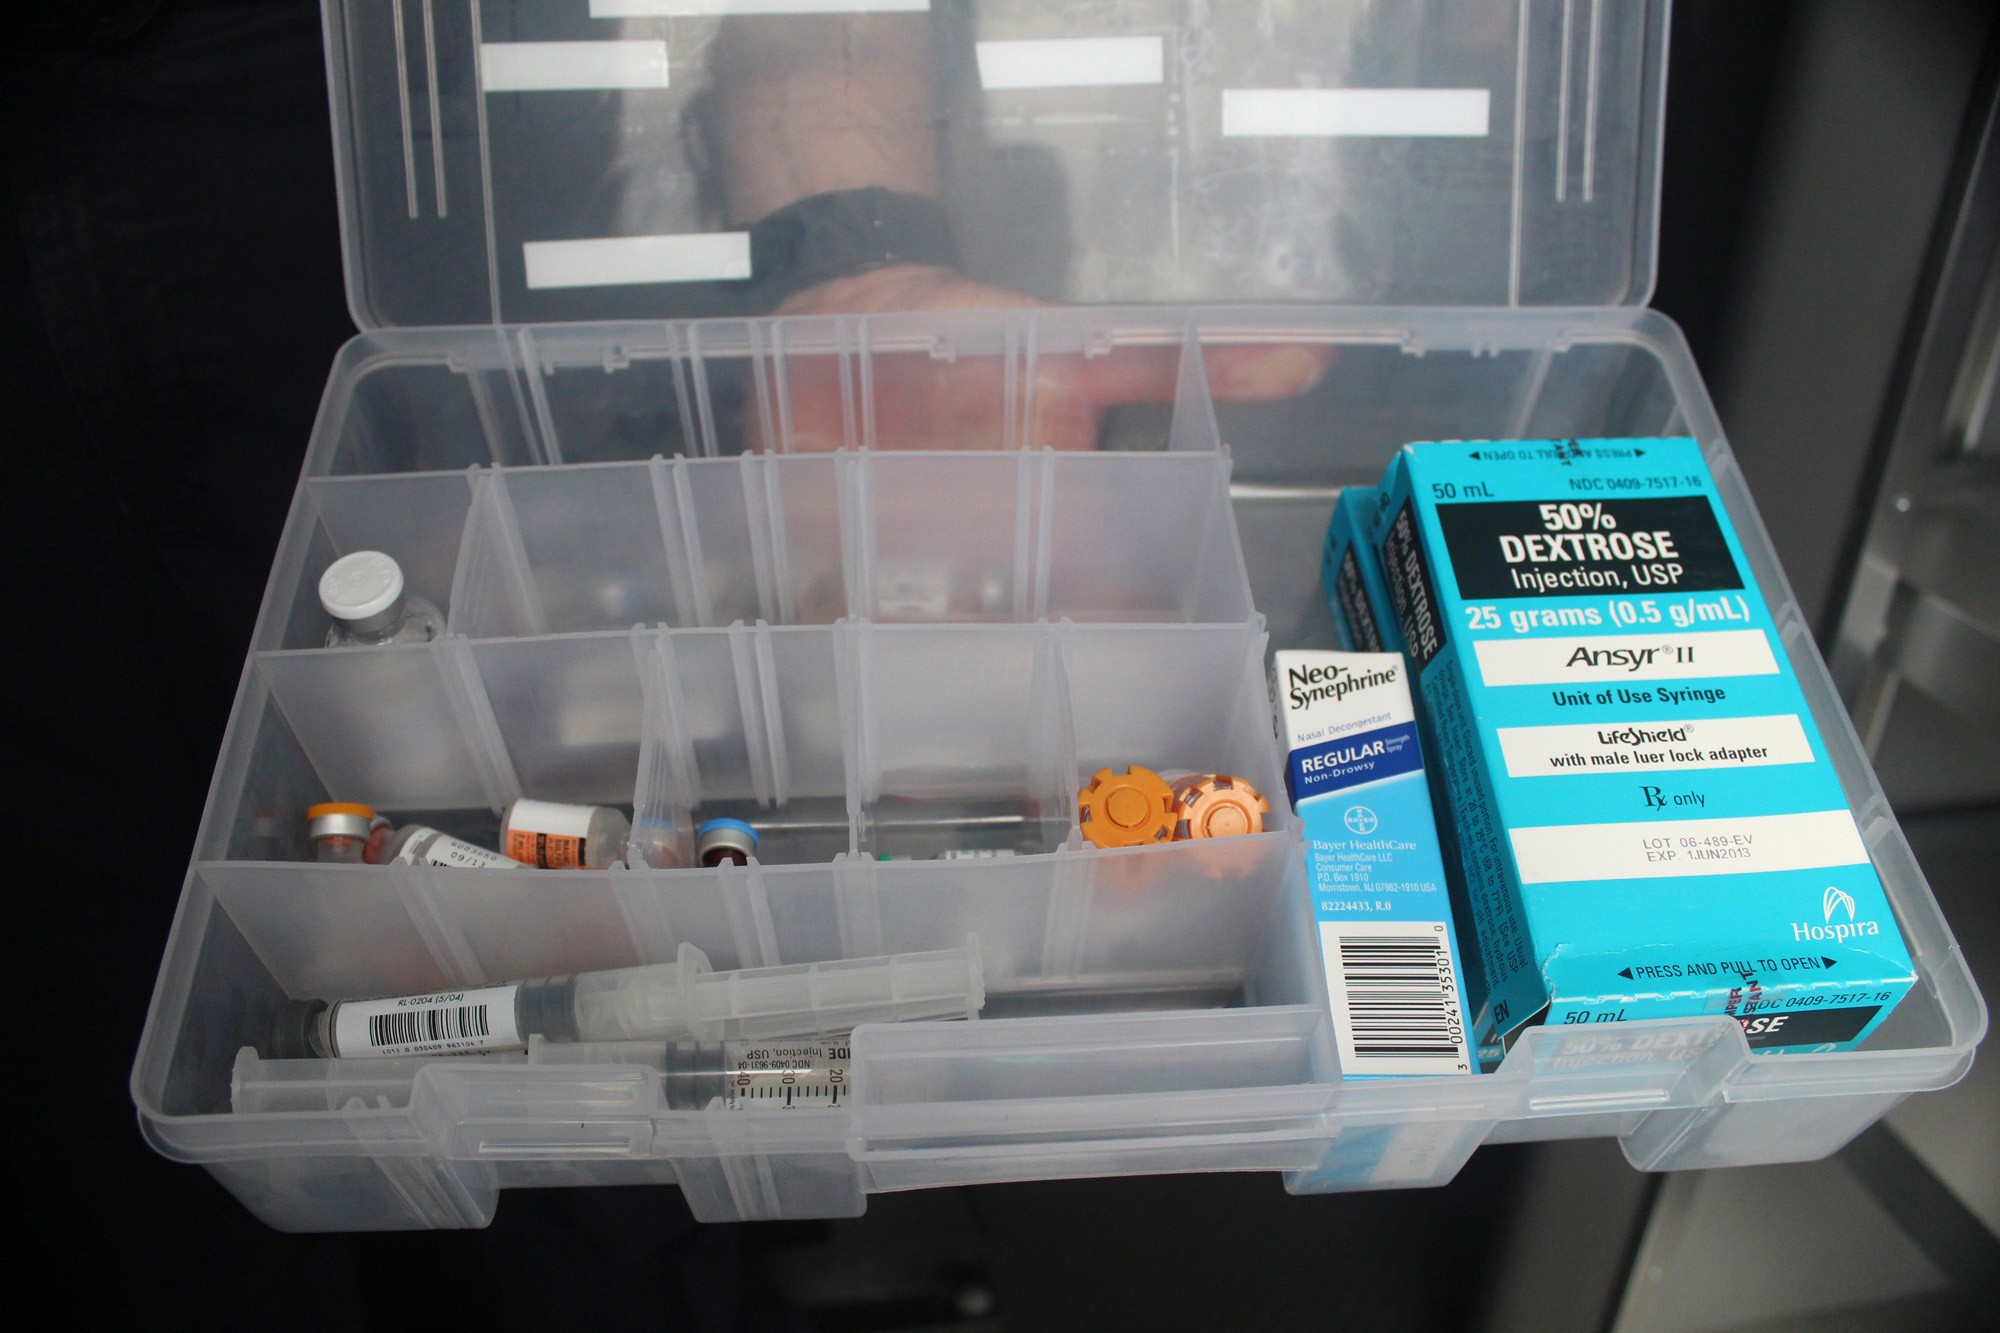 To check heat, ambulances add climate-controlled drug boxes